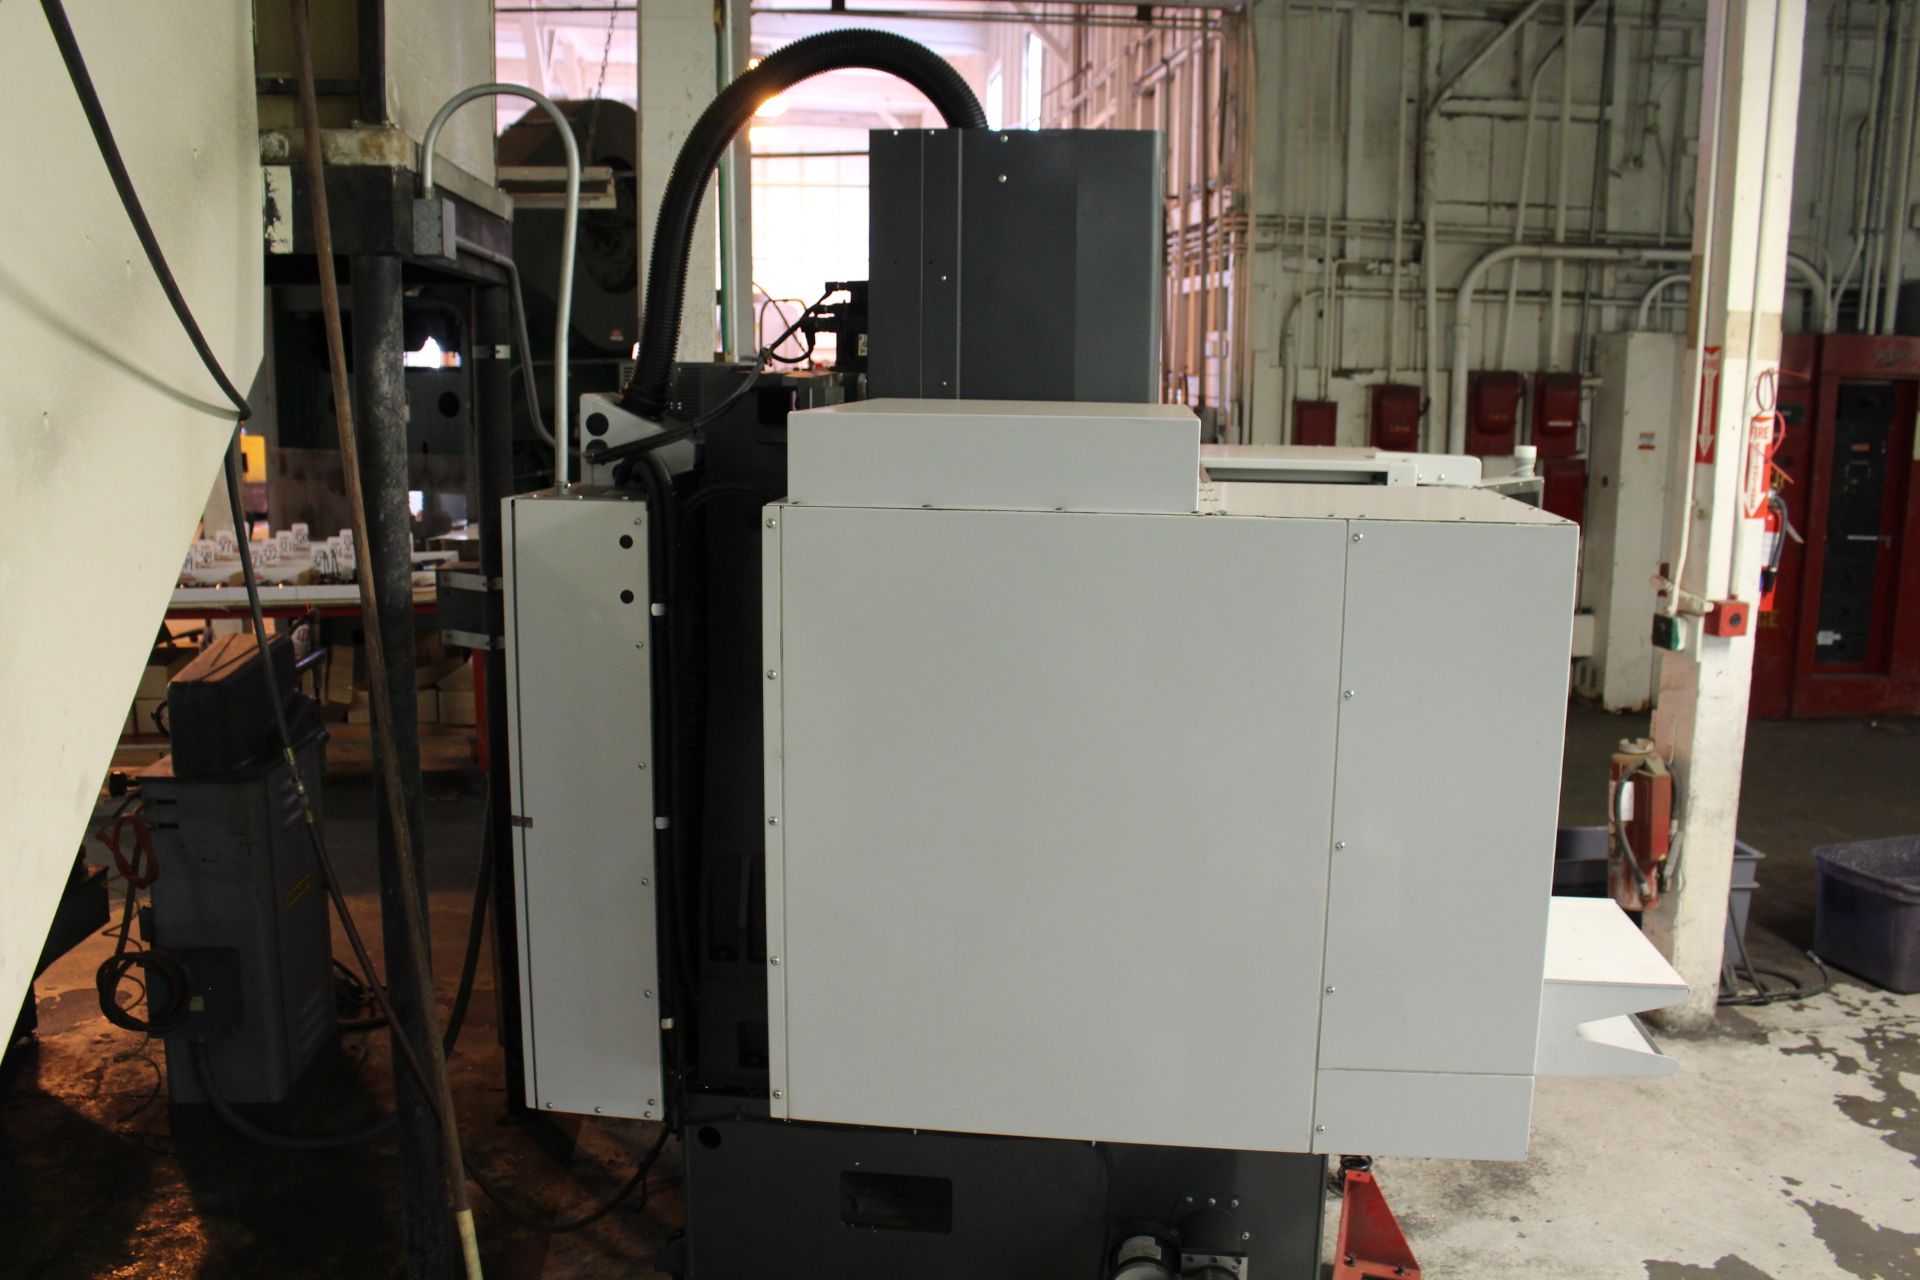 2012 HAAS SUPERMINI MILL 2 CNC VERTICAL MILL, S/N 1097695, 20" X, 16" Y, 14" Z, 40" X 14" TABLE, - Image 3 of 7